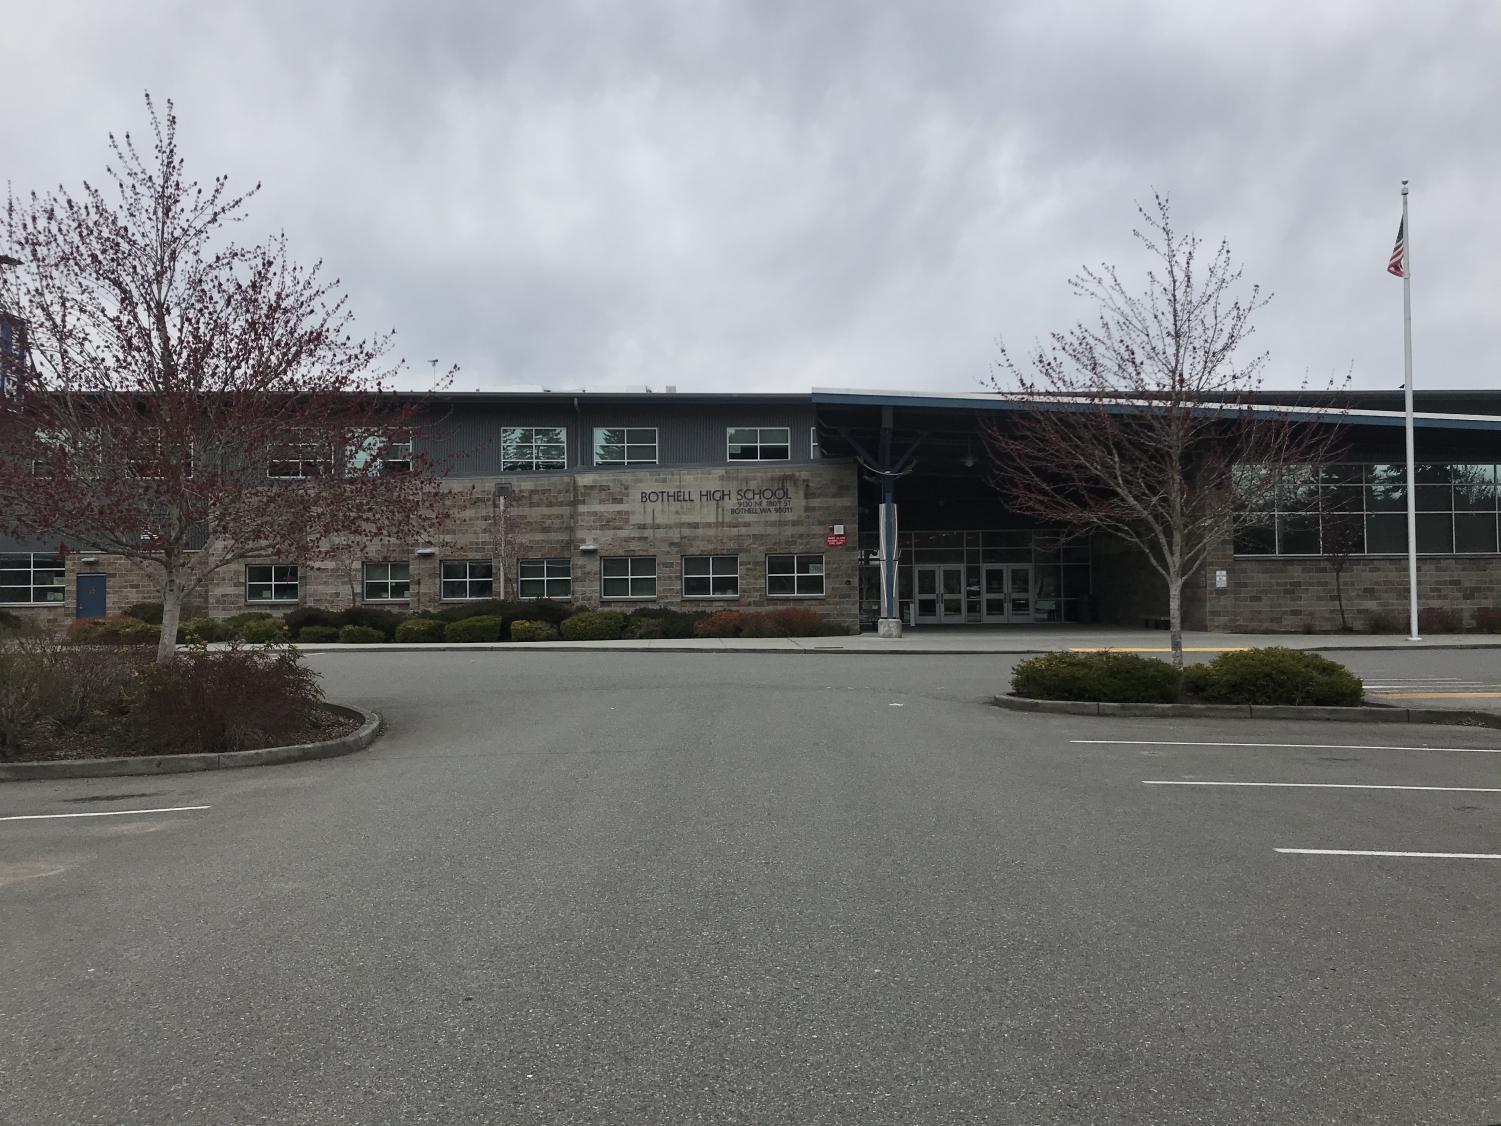 Bothell+High+School+was+the+first+school+in+the+Northshore+School+District+to+close+because+of+the+COVID-19+coronavirus.+%0ADate+of+Photo%3A%28Mar.+22%2C+2020%29%0A